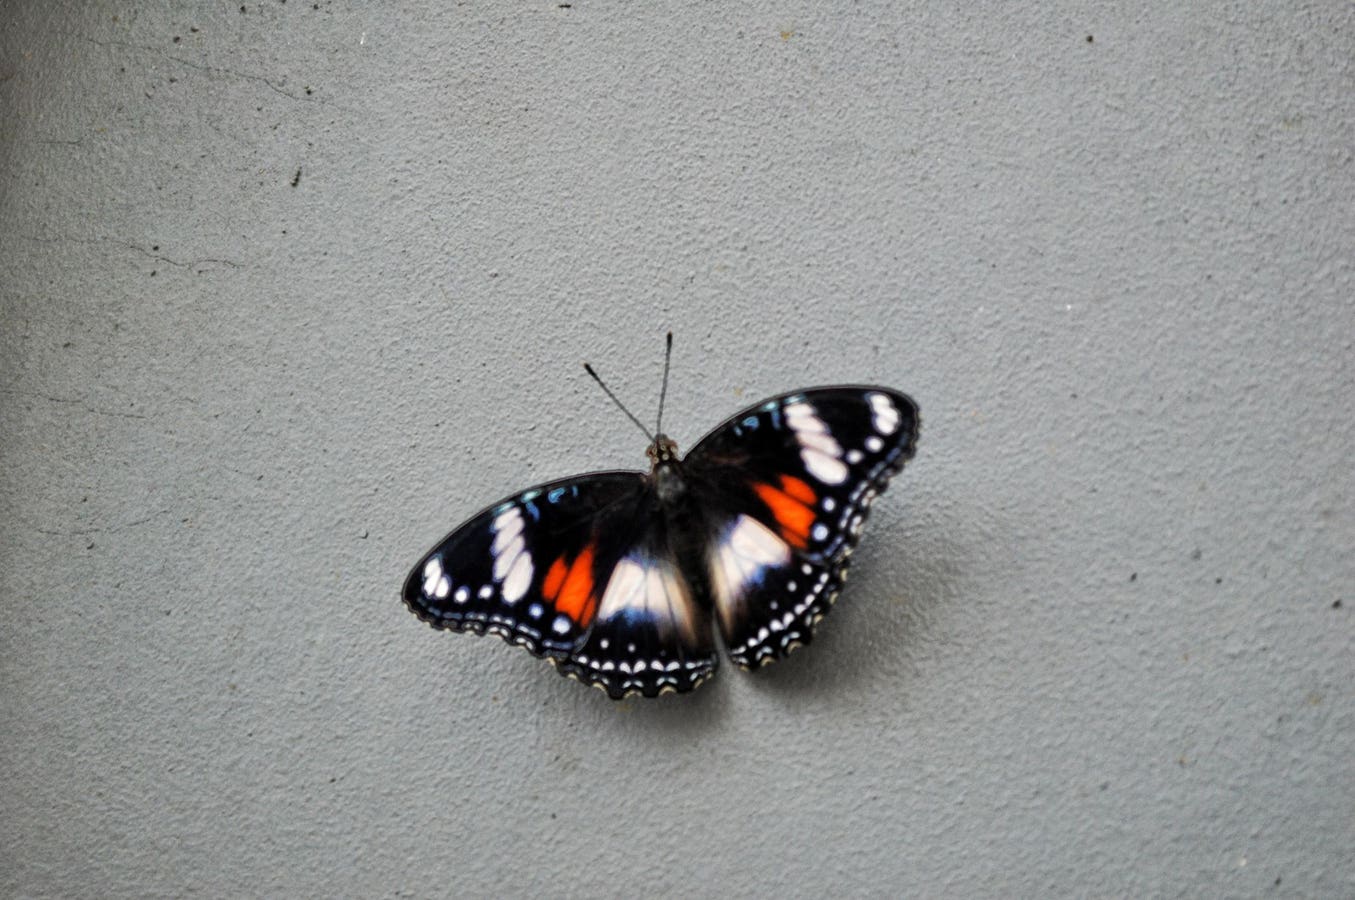 What makes or breaks a medical innovation?  Learning from the Flight of Butterfly Network